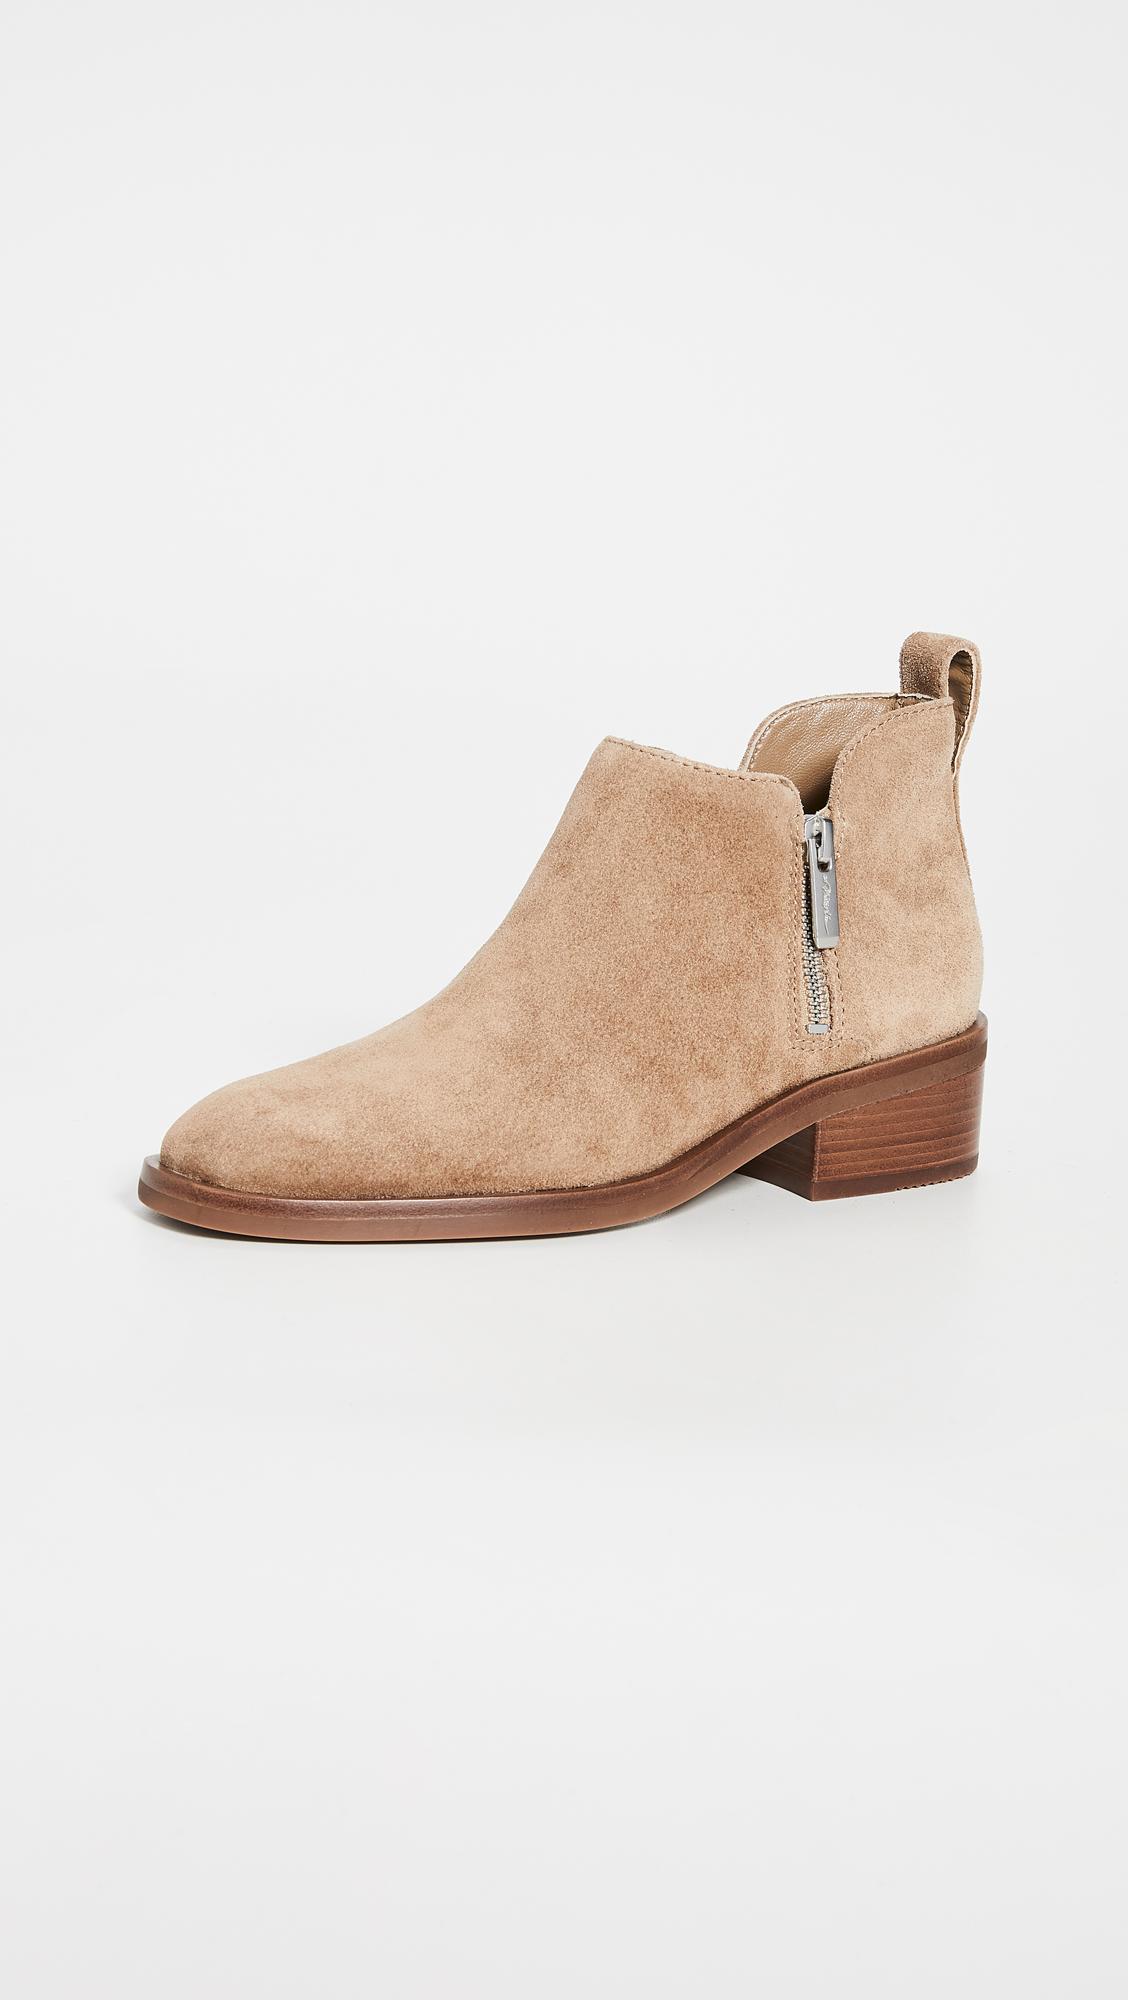 3.1 Phillip Lim Leather Alexa 40mm Ankle Boots in Tobacco (Brown 